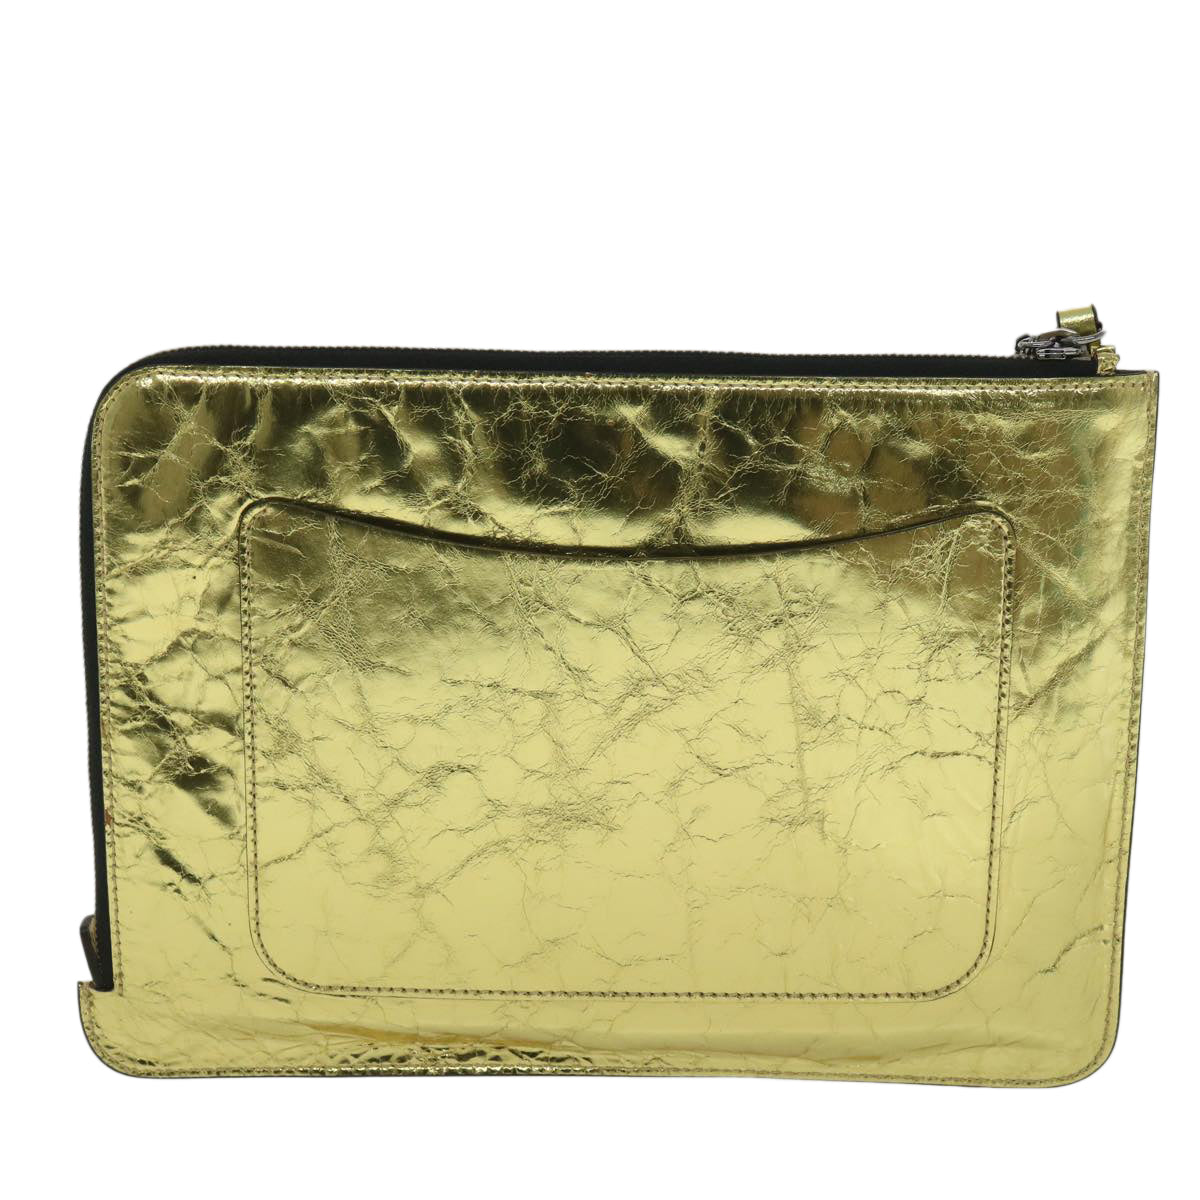 CHANEL Clutch Bag Metallic Leather Gold A82164 CC Auth 38172 - 0